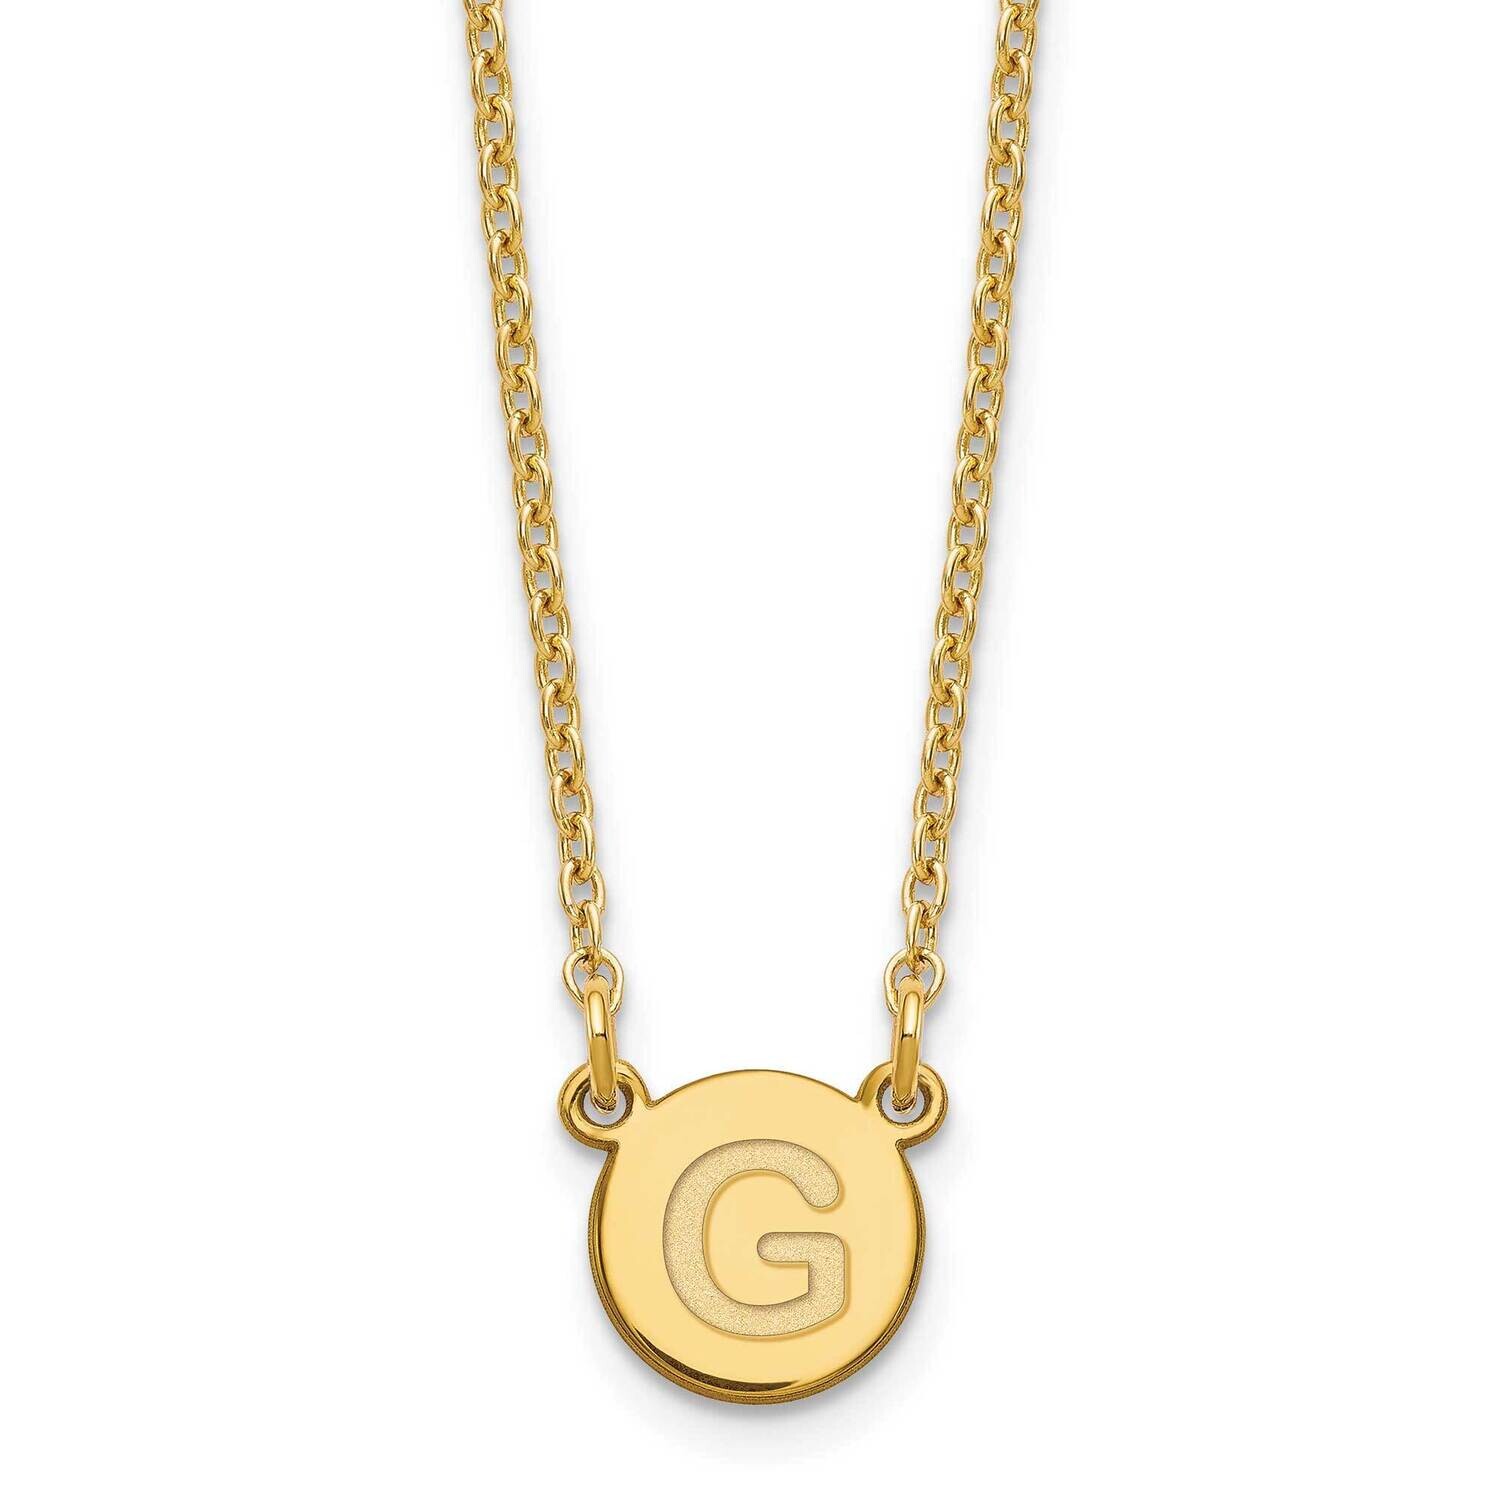 Gold-Plated Tiny Circle Block Letter G Initial Necklace Sterling Silver XNA722GP/G